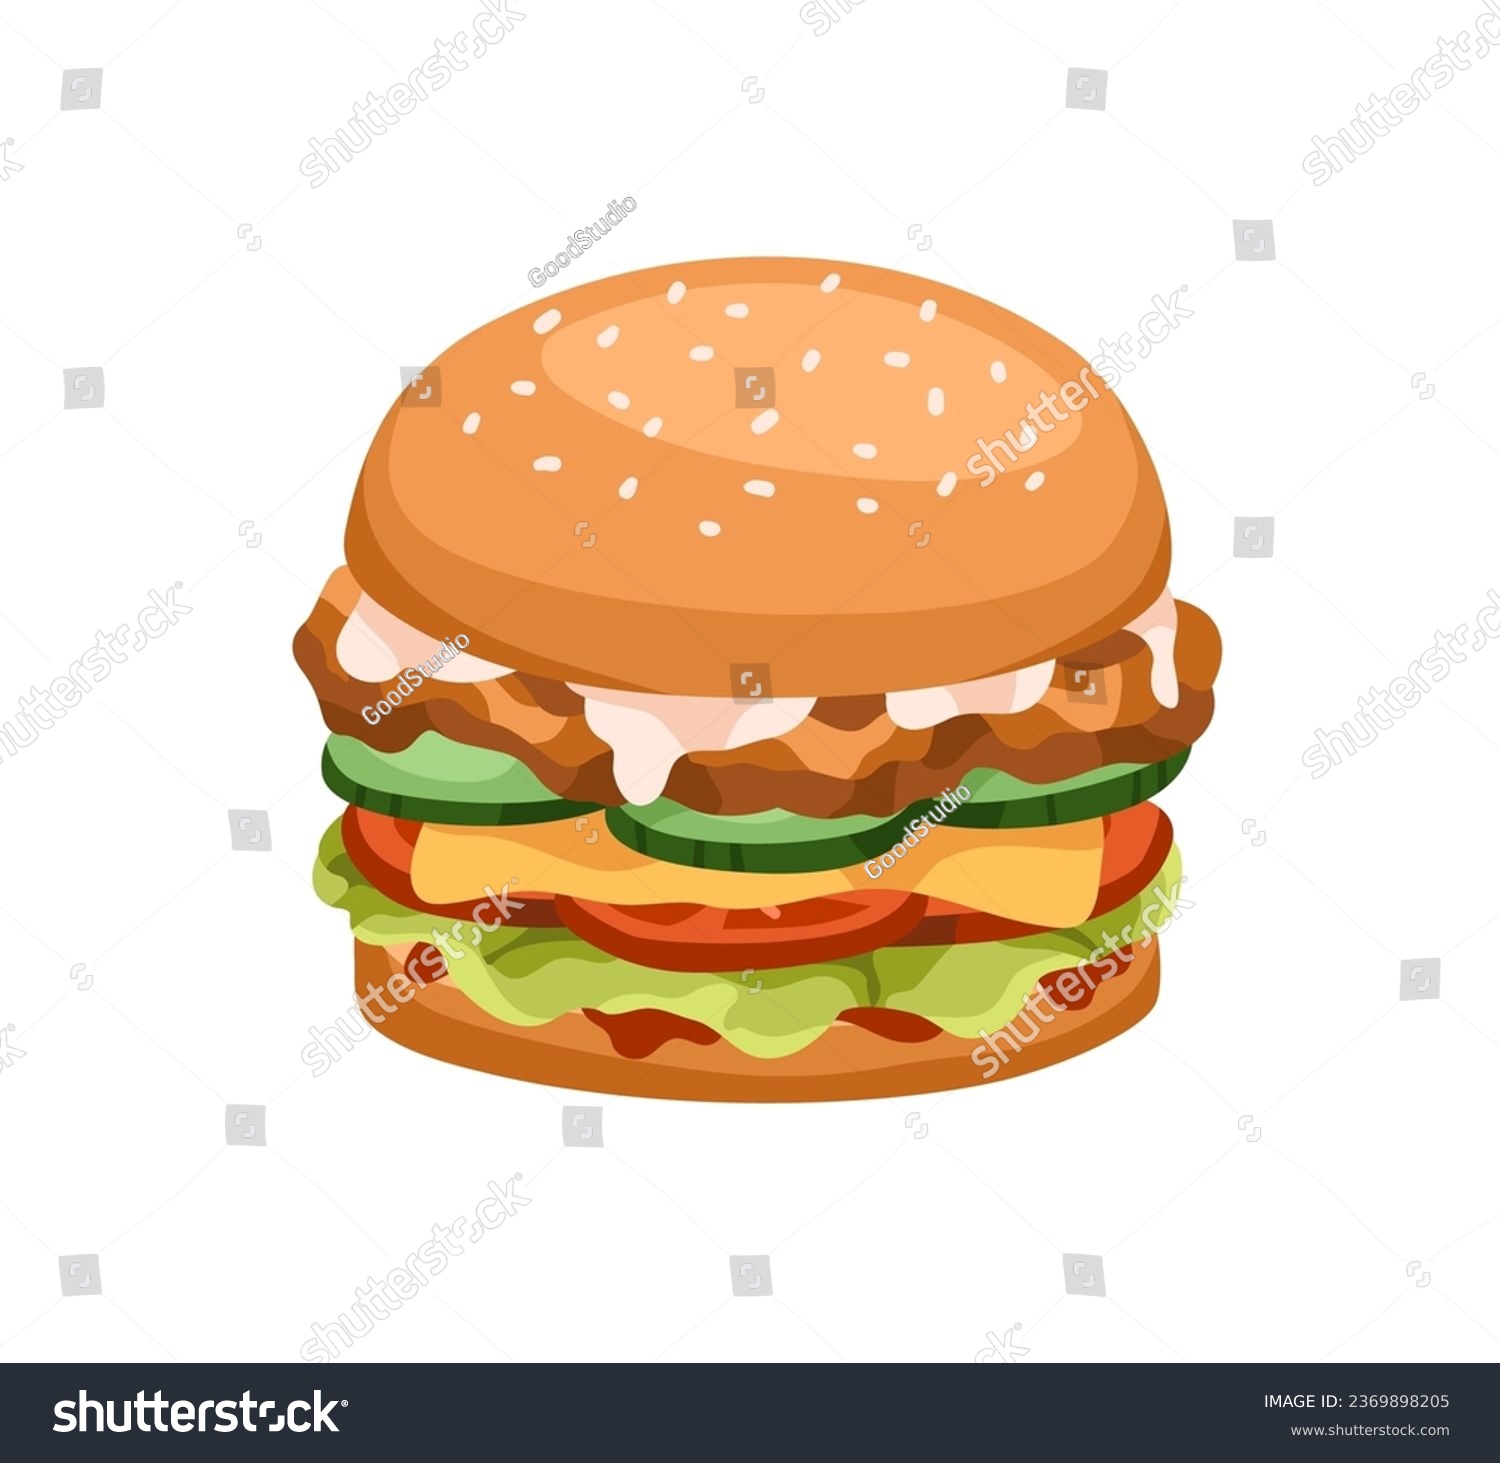 SVG of Burger with chicken cutlet, vegetables and cheese filling. American fast food. Sandwich with meat, bacon, cheddar, lettuce. Snack between buns. Flat vector illustration isolated on white background svg